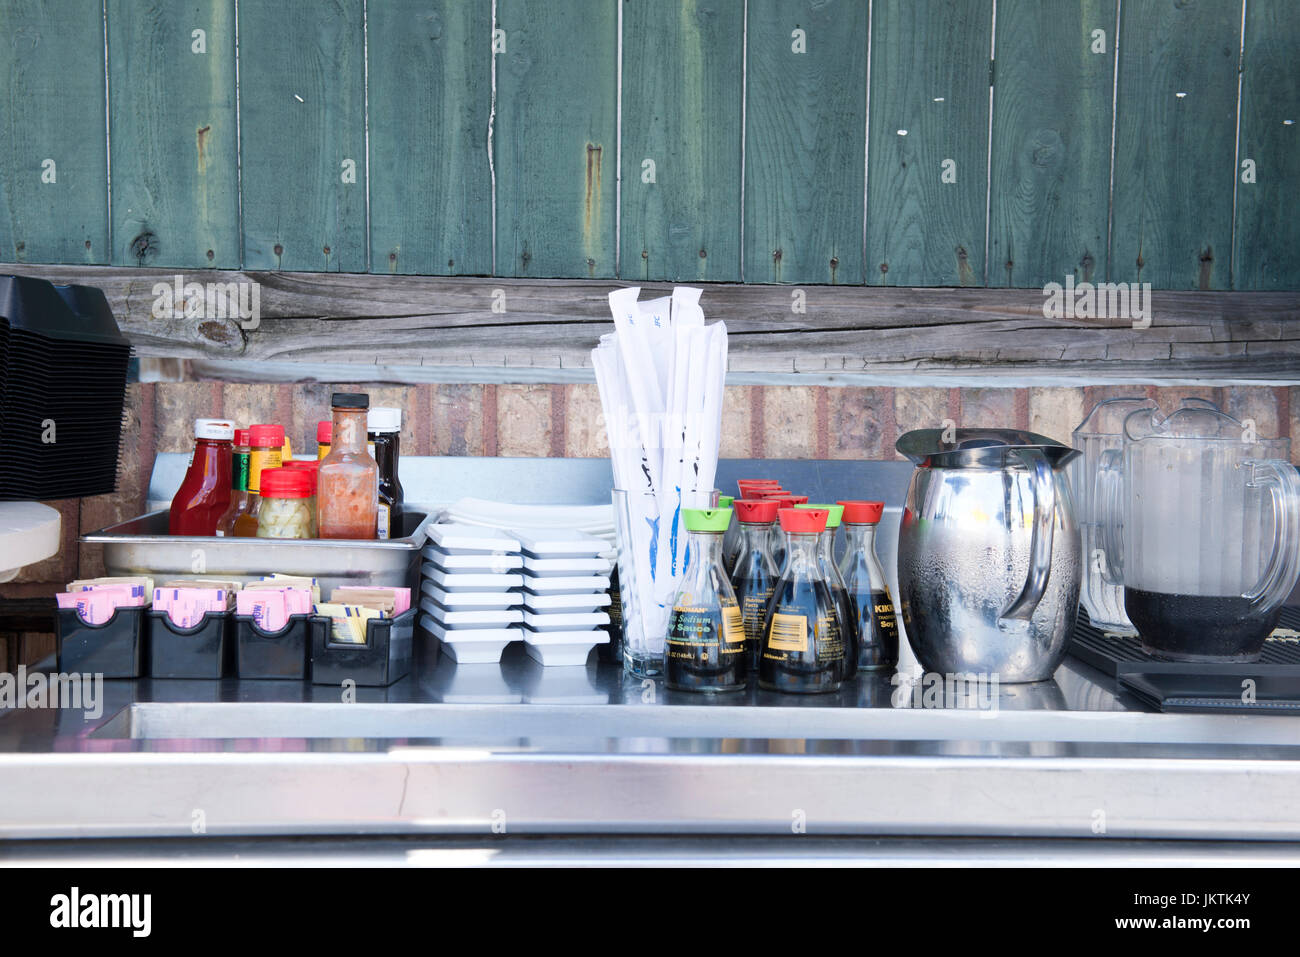 This is an image of a condiment station at an outdoor restaurant.  Condiments include, ketchup, hot sauce, pepper sauce, sweetner, straws, tea and wat Stock Photo